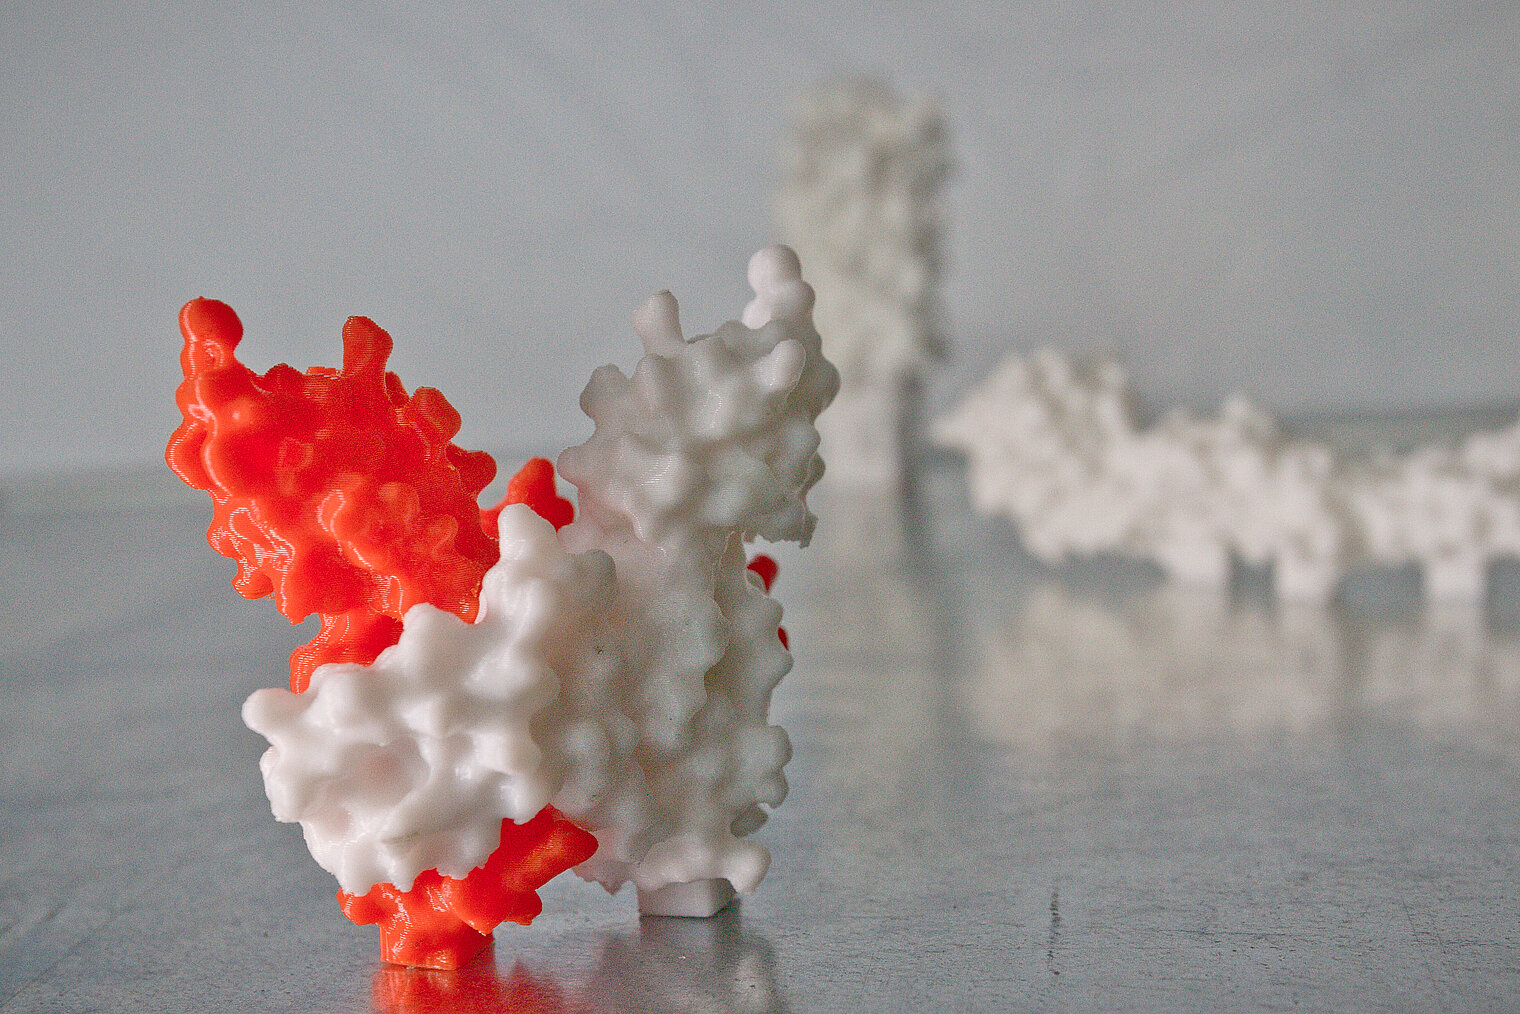 3D models of protein structures solved at the HZI.